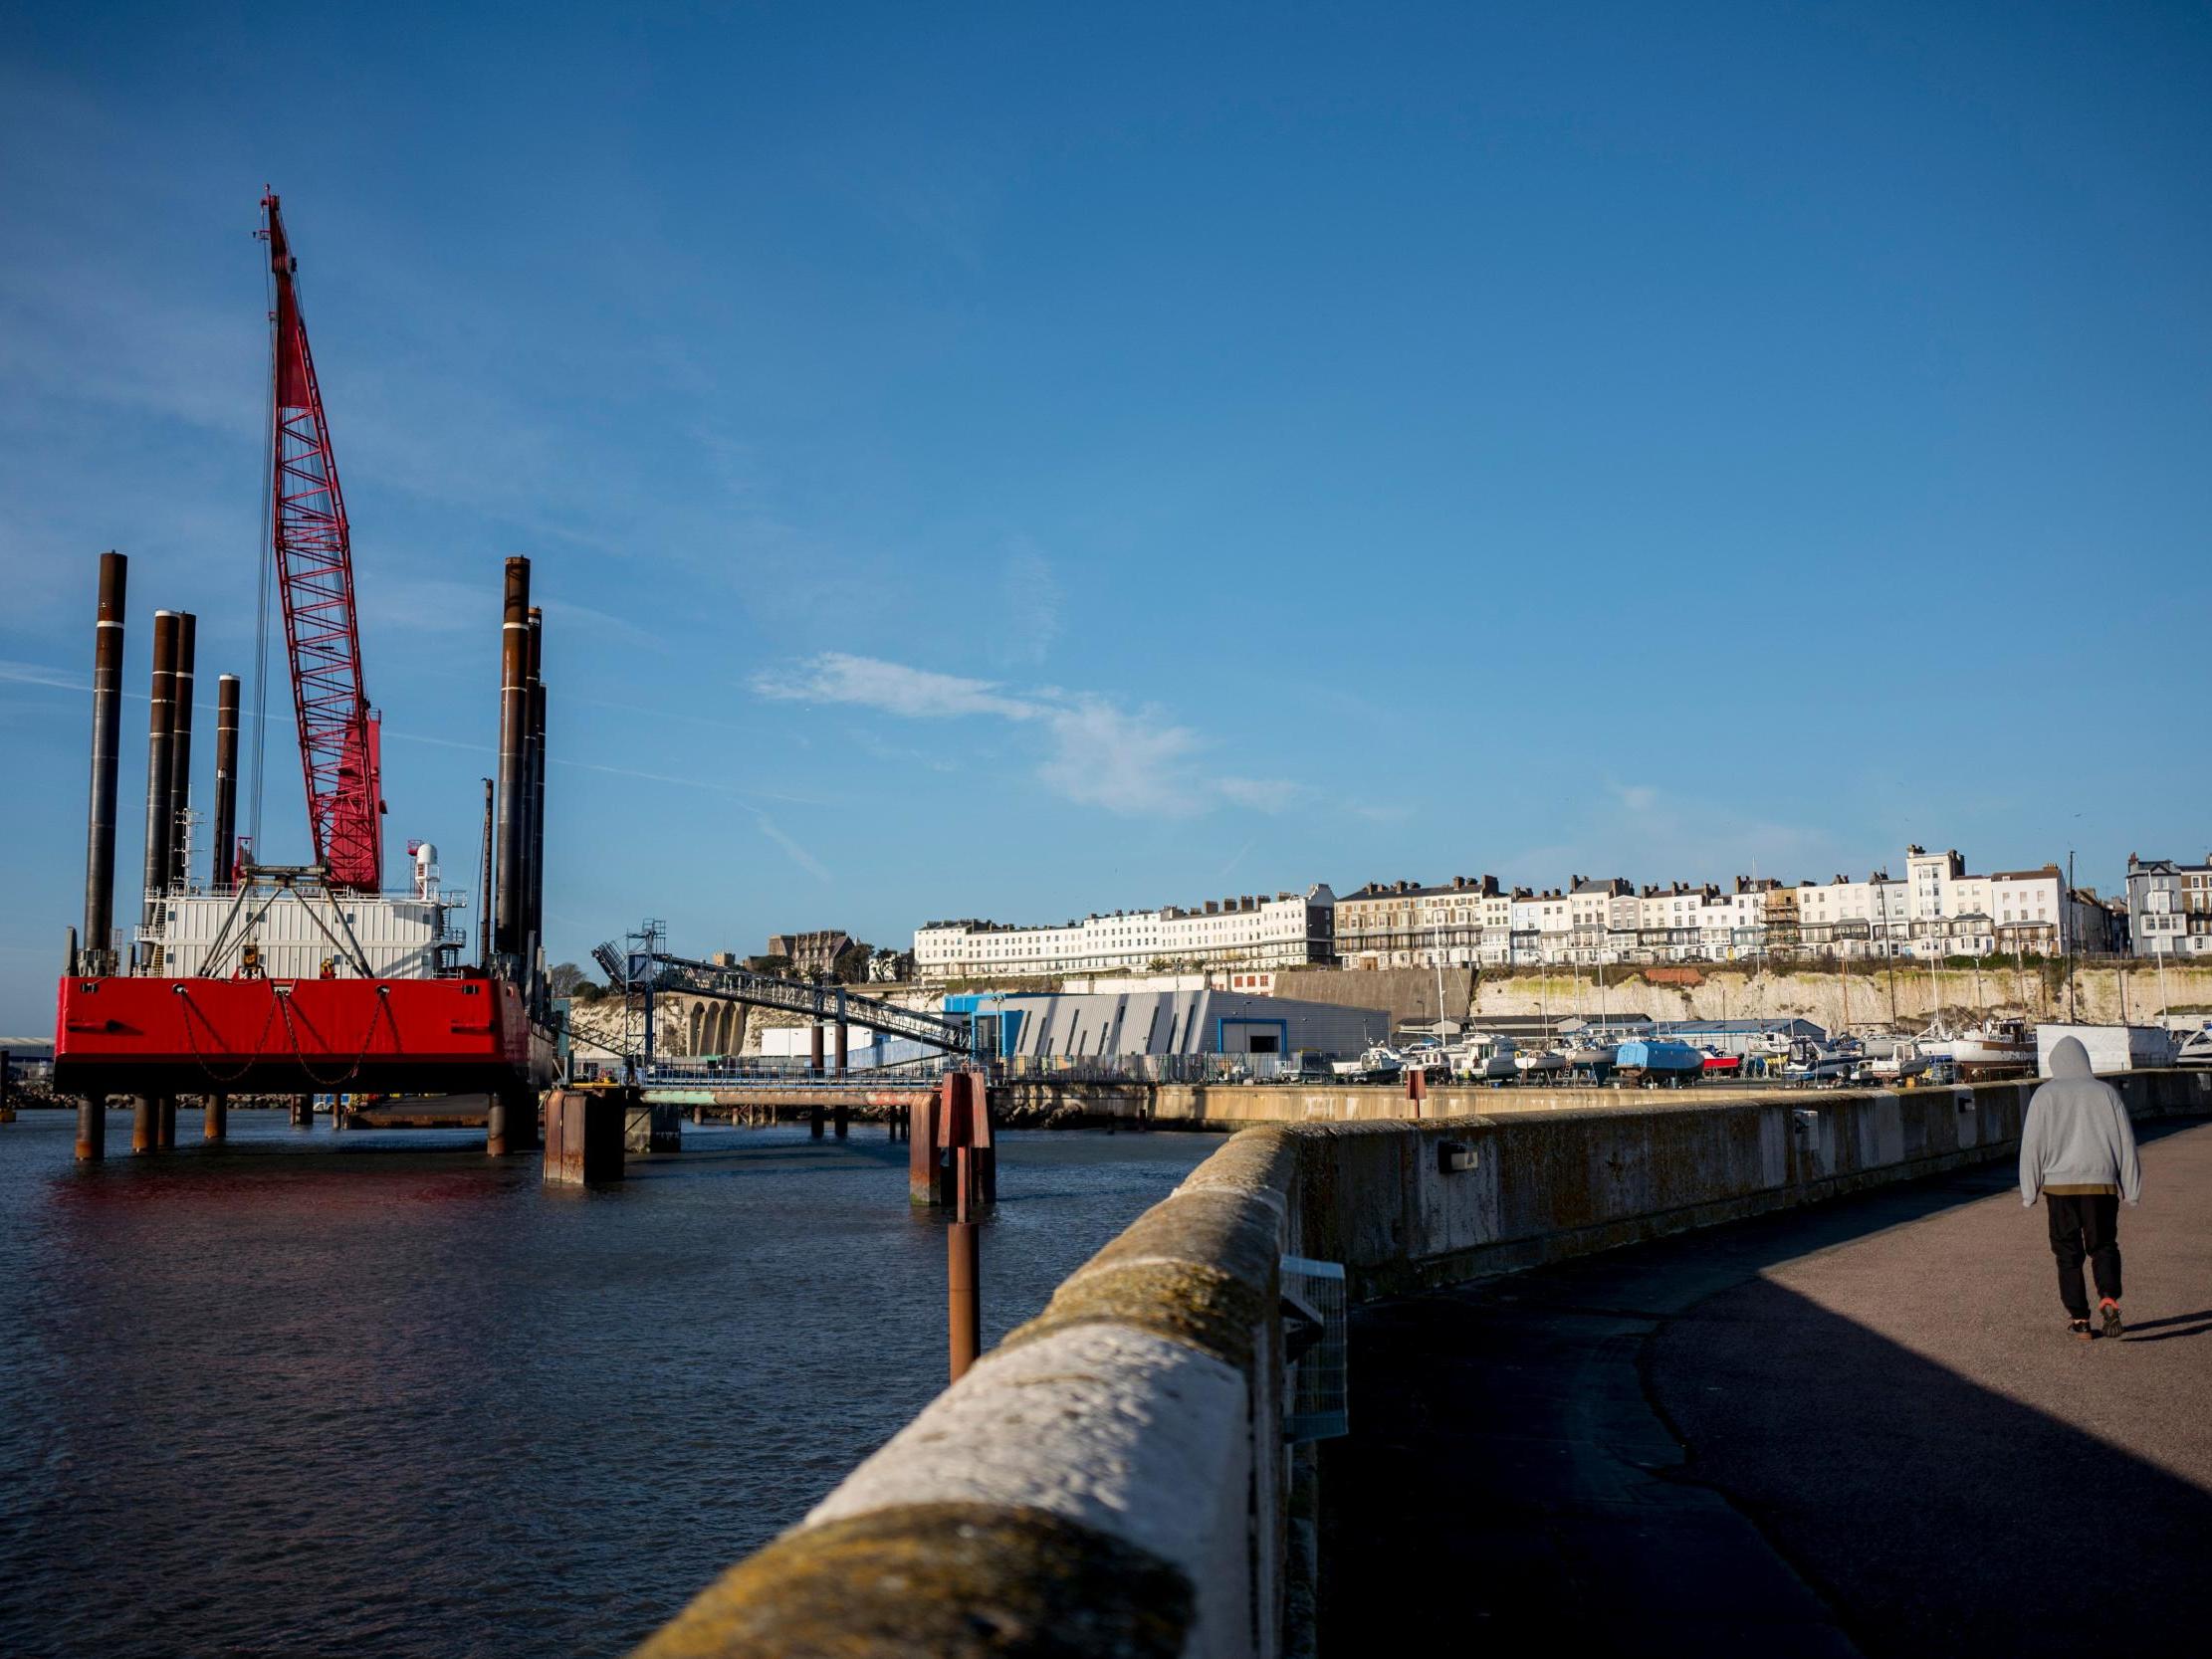 Some ports, such as Ramsgate, already spend tens of millions of pounds on dredging every year